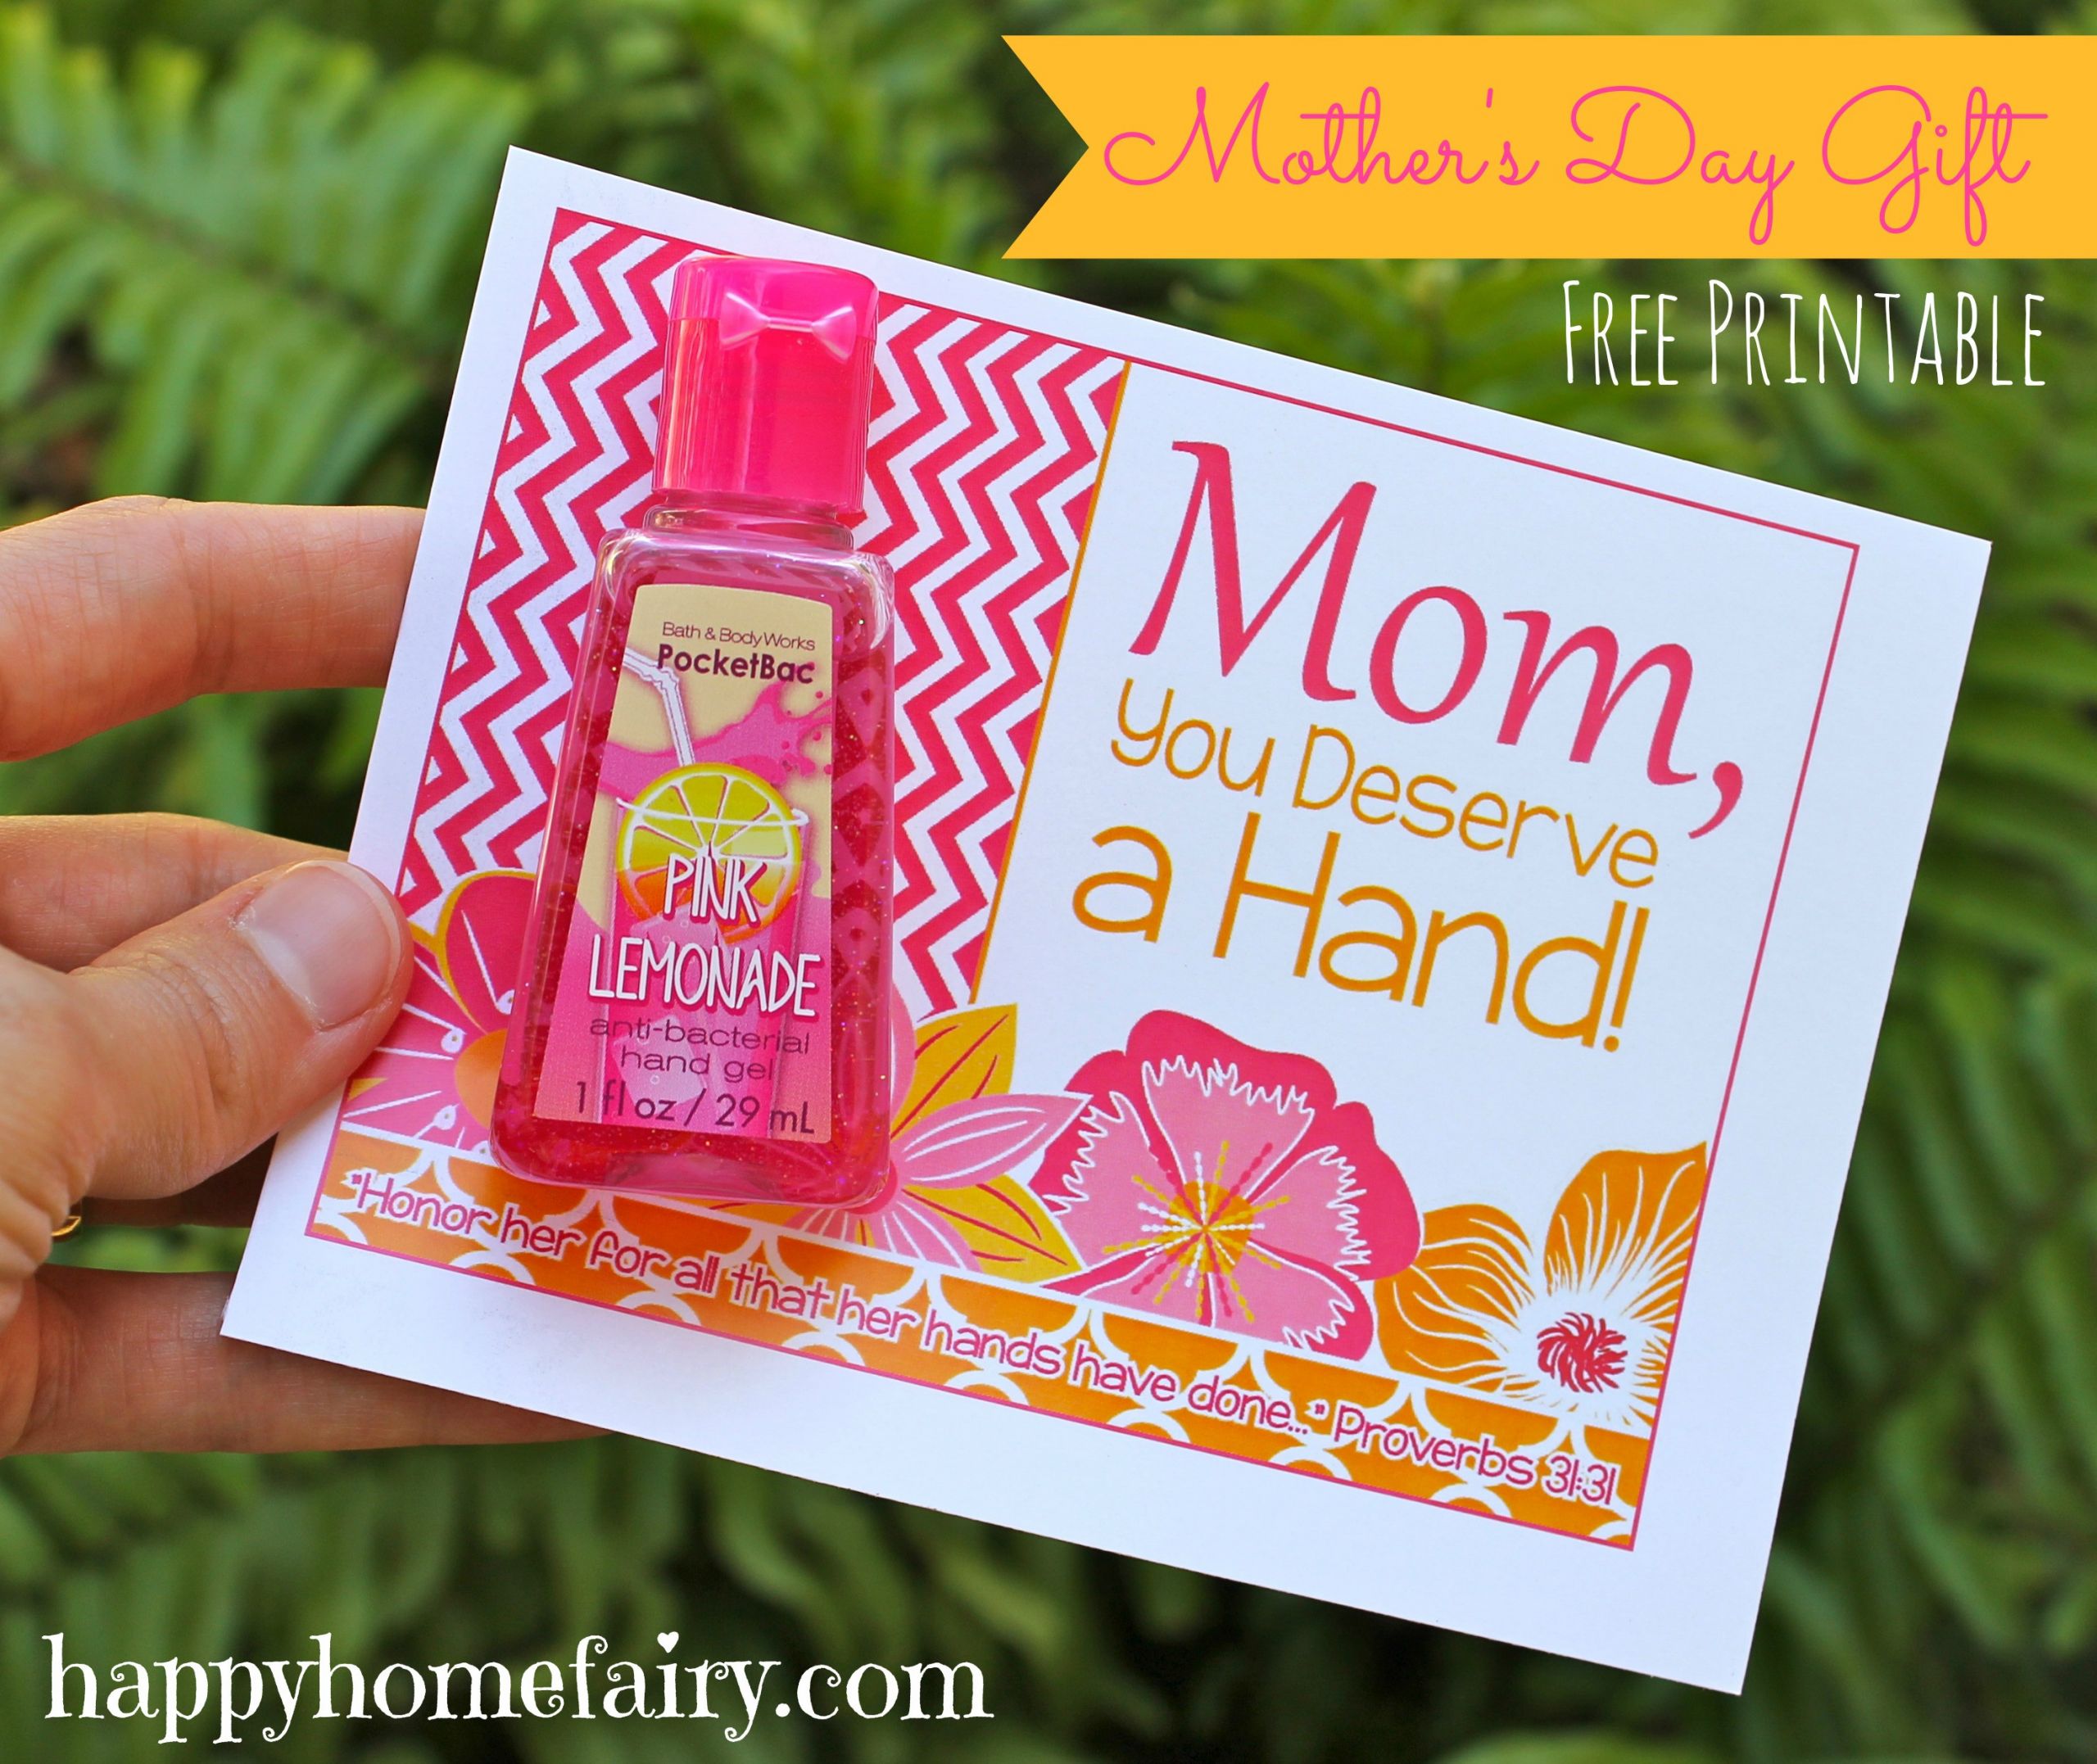 Mothers Day Gift Ideas Pinterest
 Easy Mother s Day Gift Idea FREE Printable Happy Home